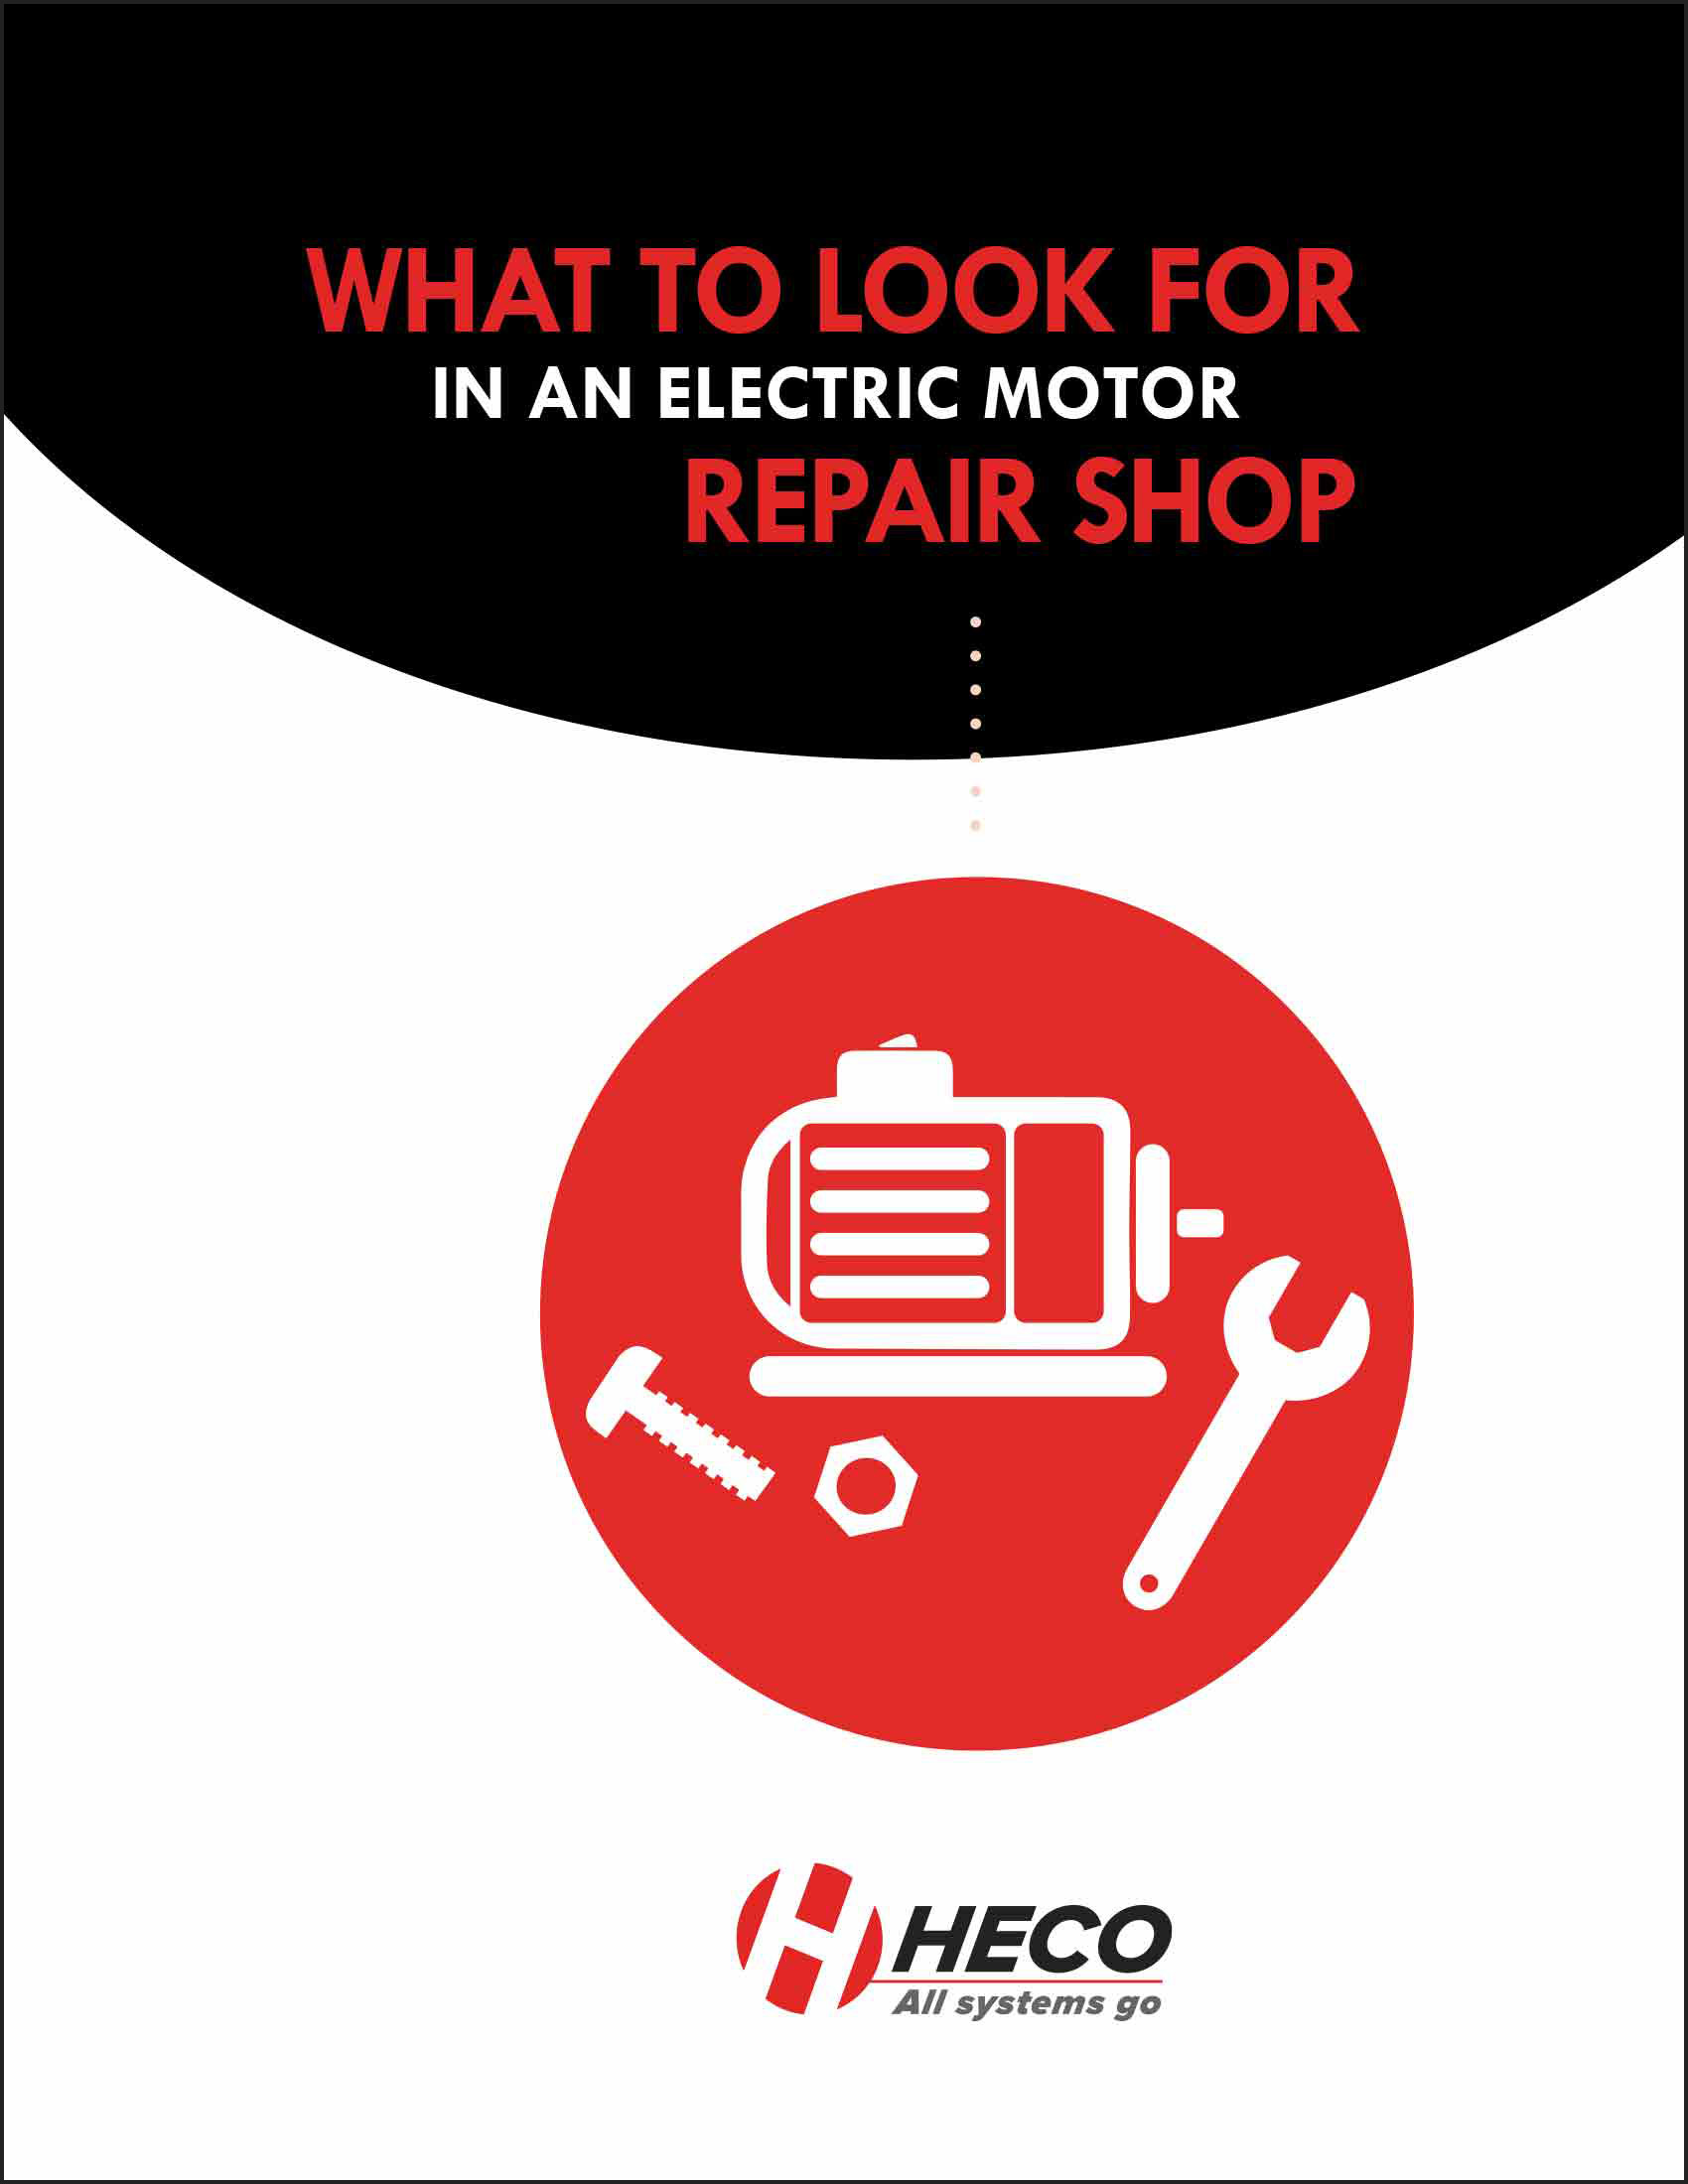 What to look for in an electric motor repair shop book